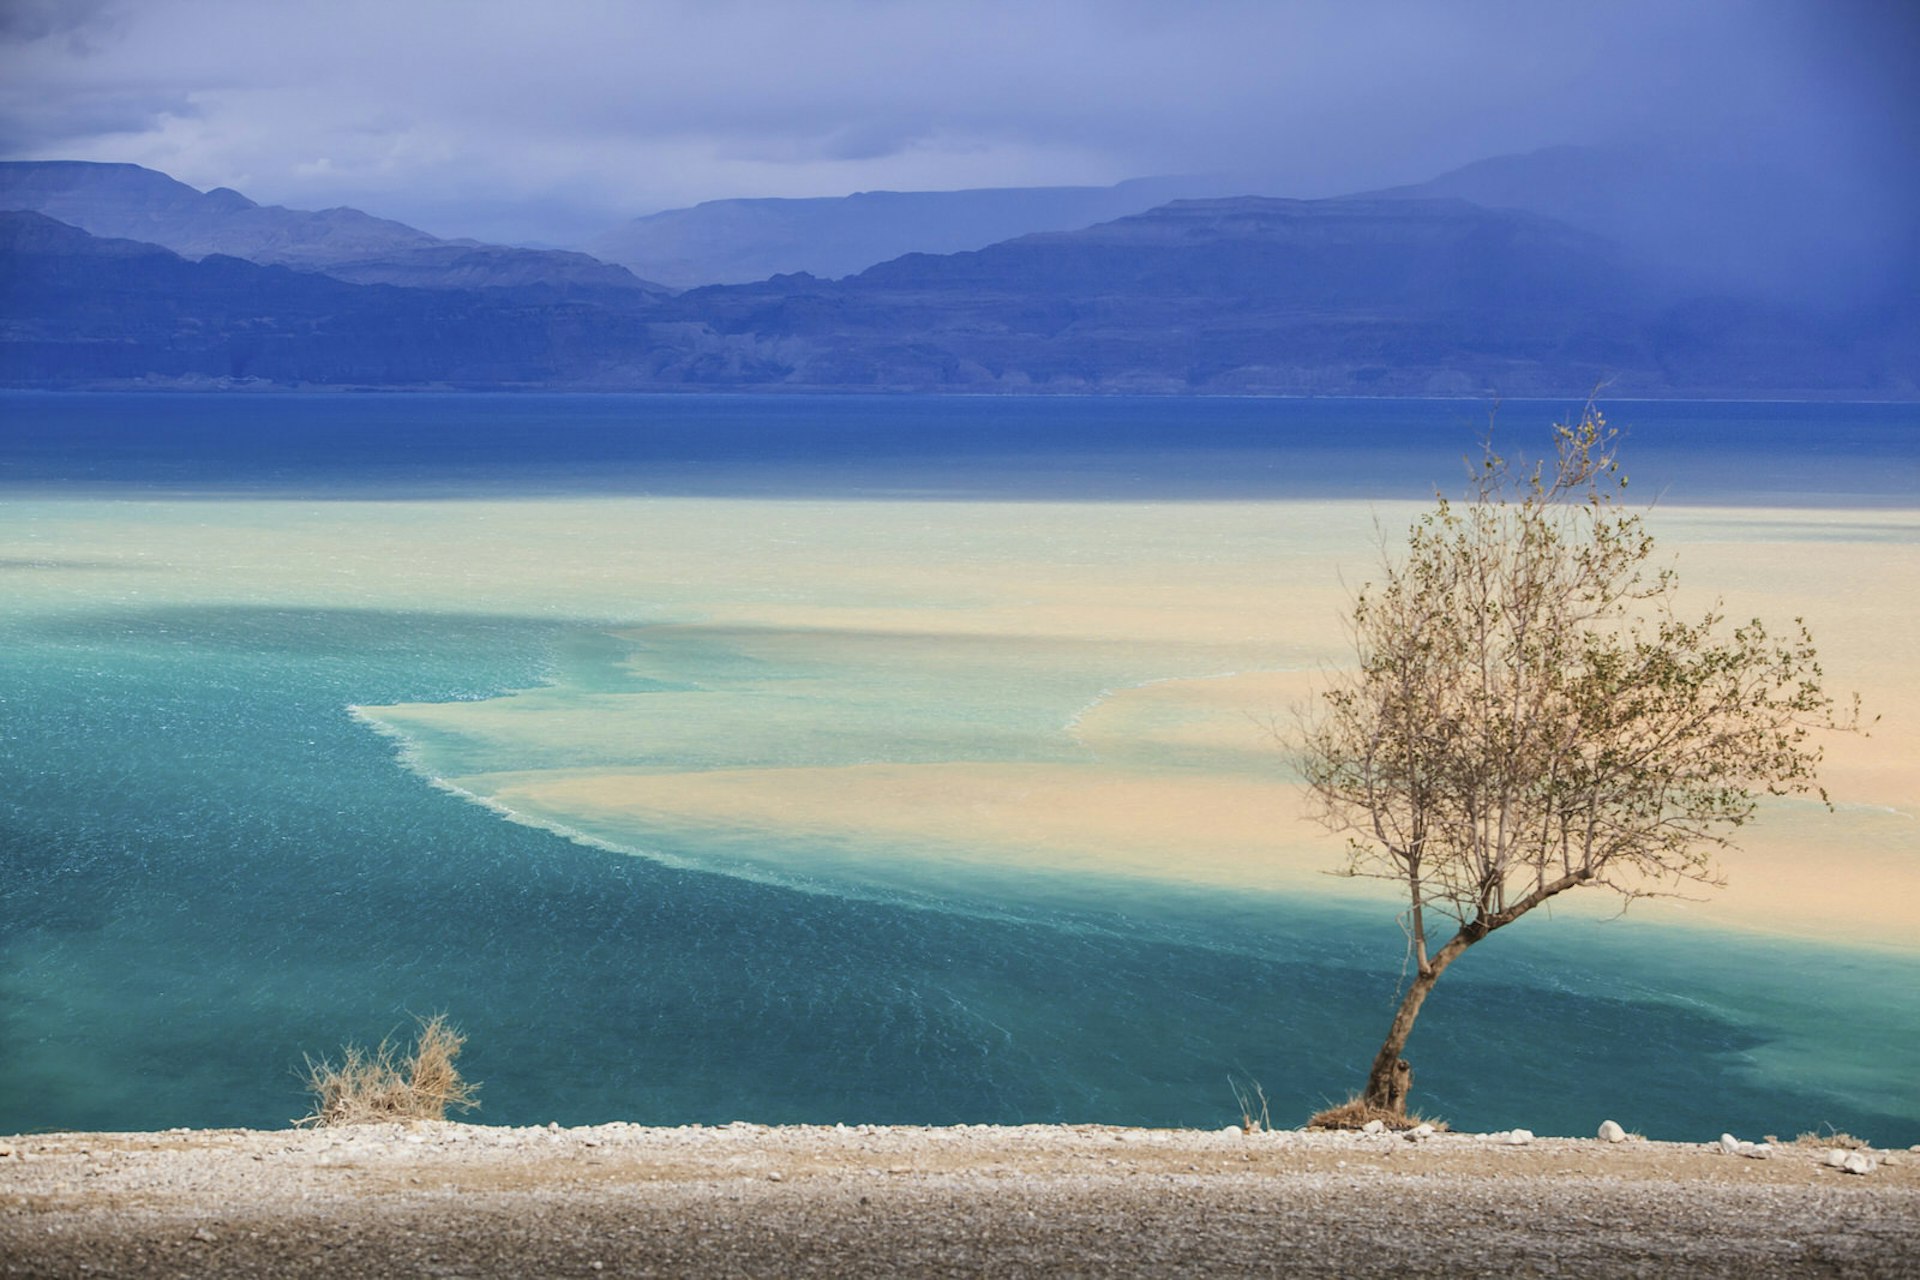 View of the Dead Sea. Image by Reynold Mainse / Design Pics / Getty Images